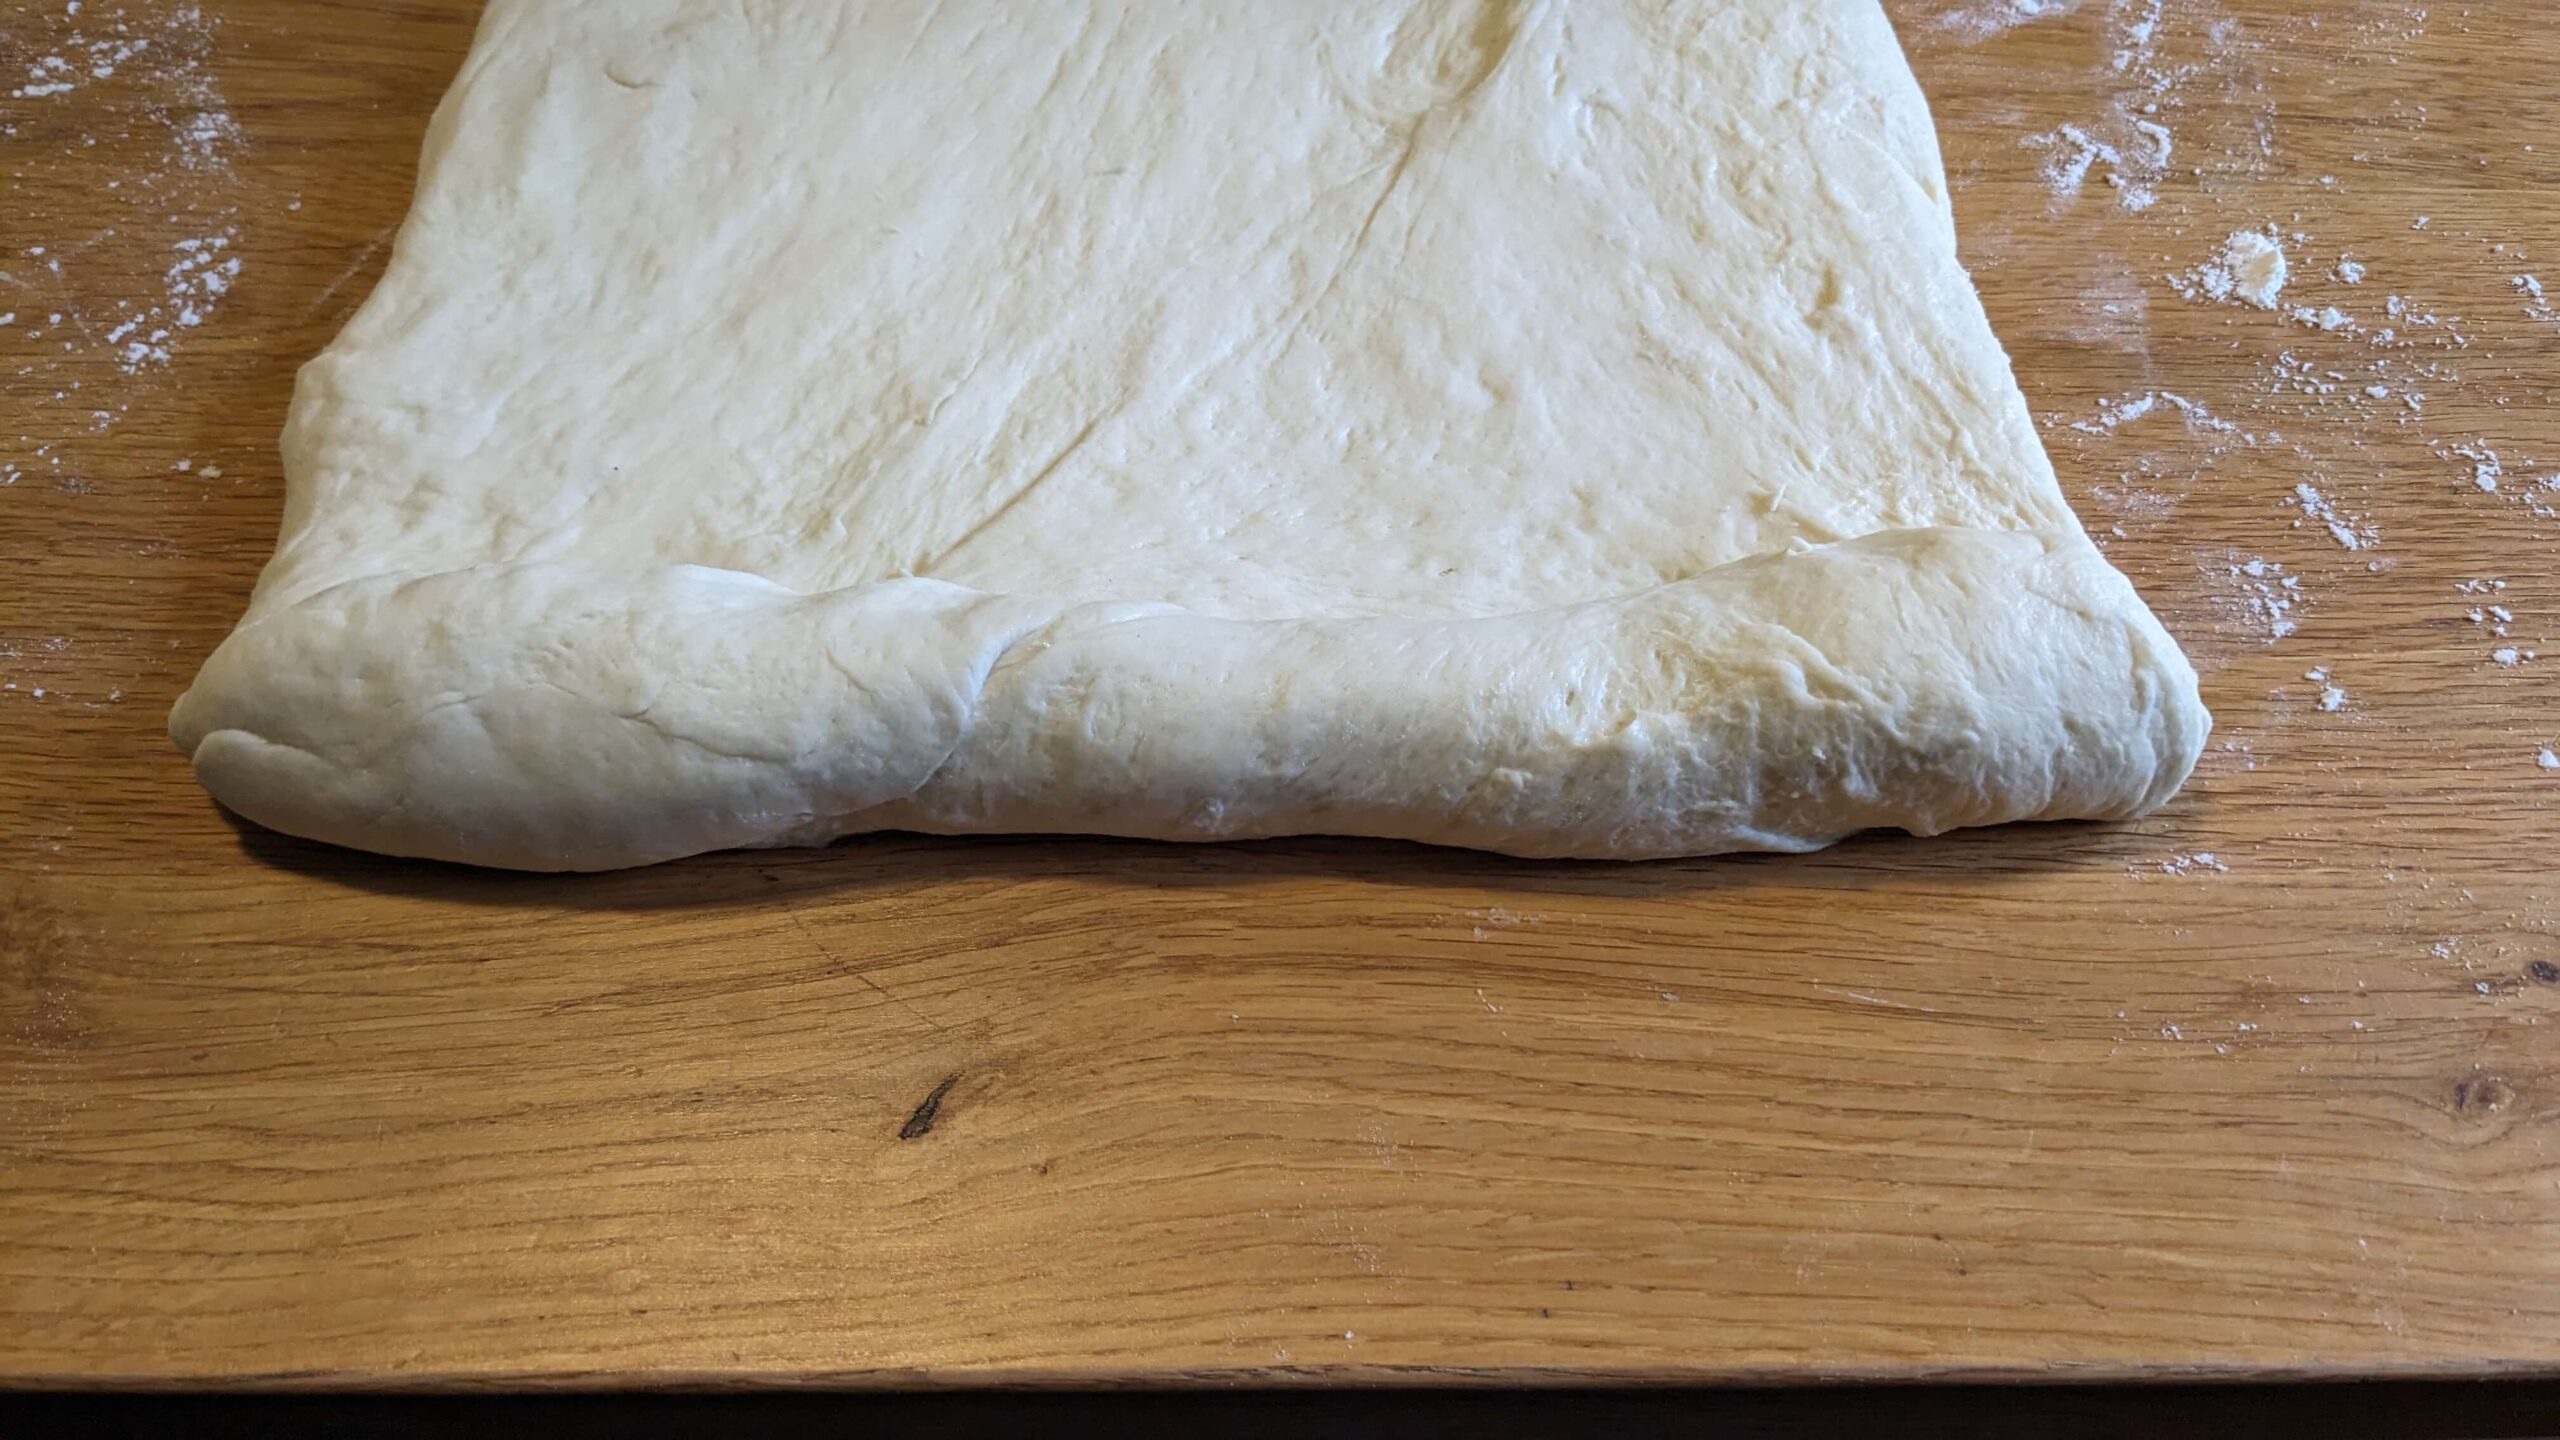 rolled up edge of bread dough